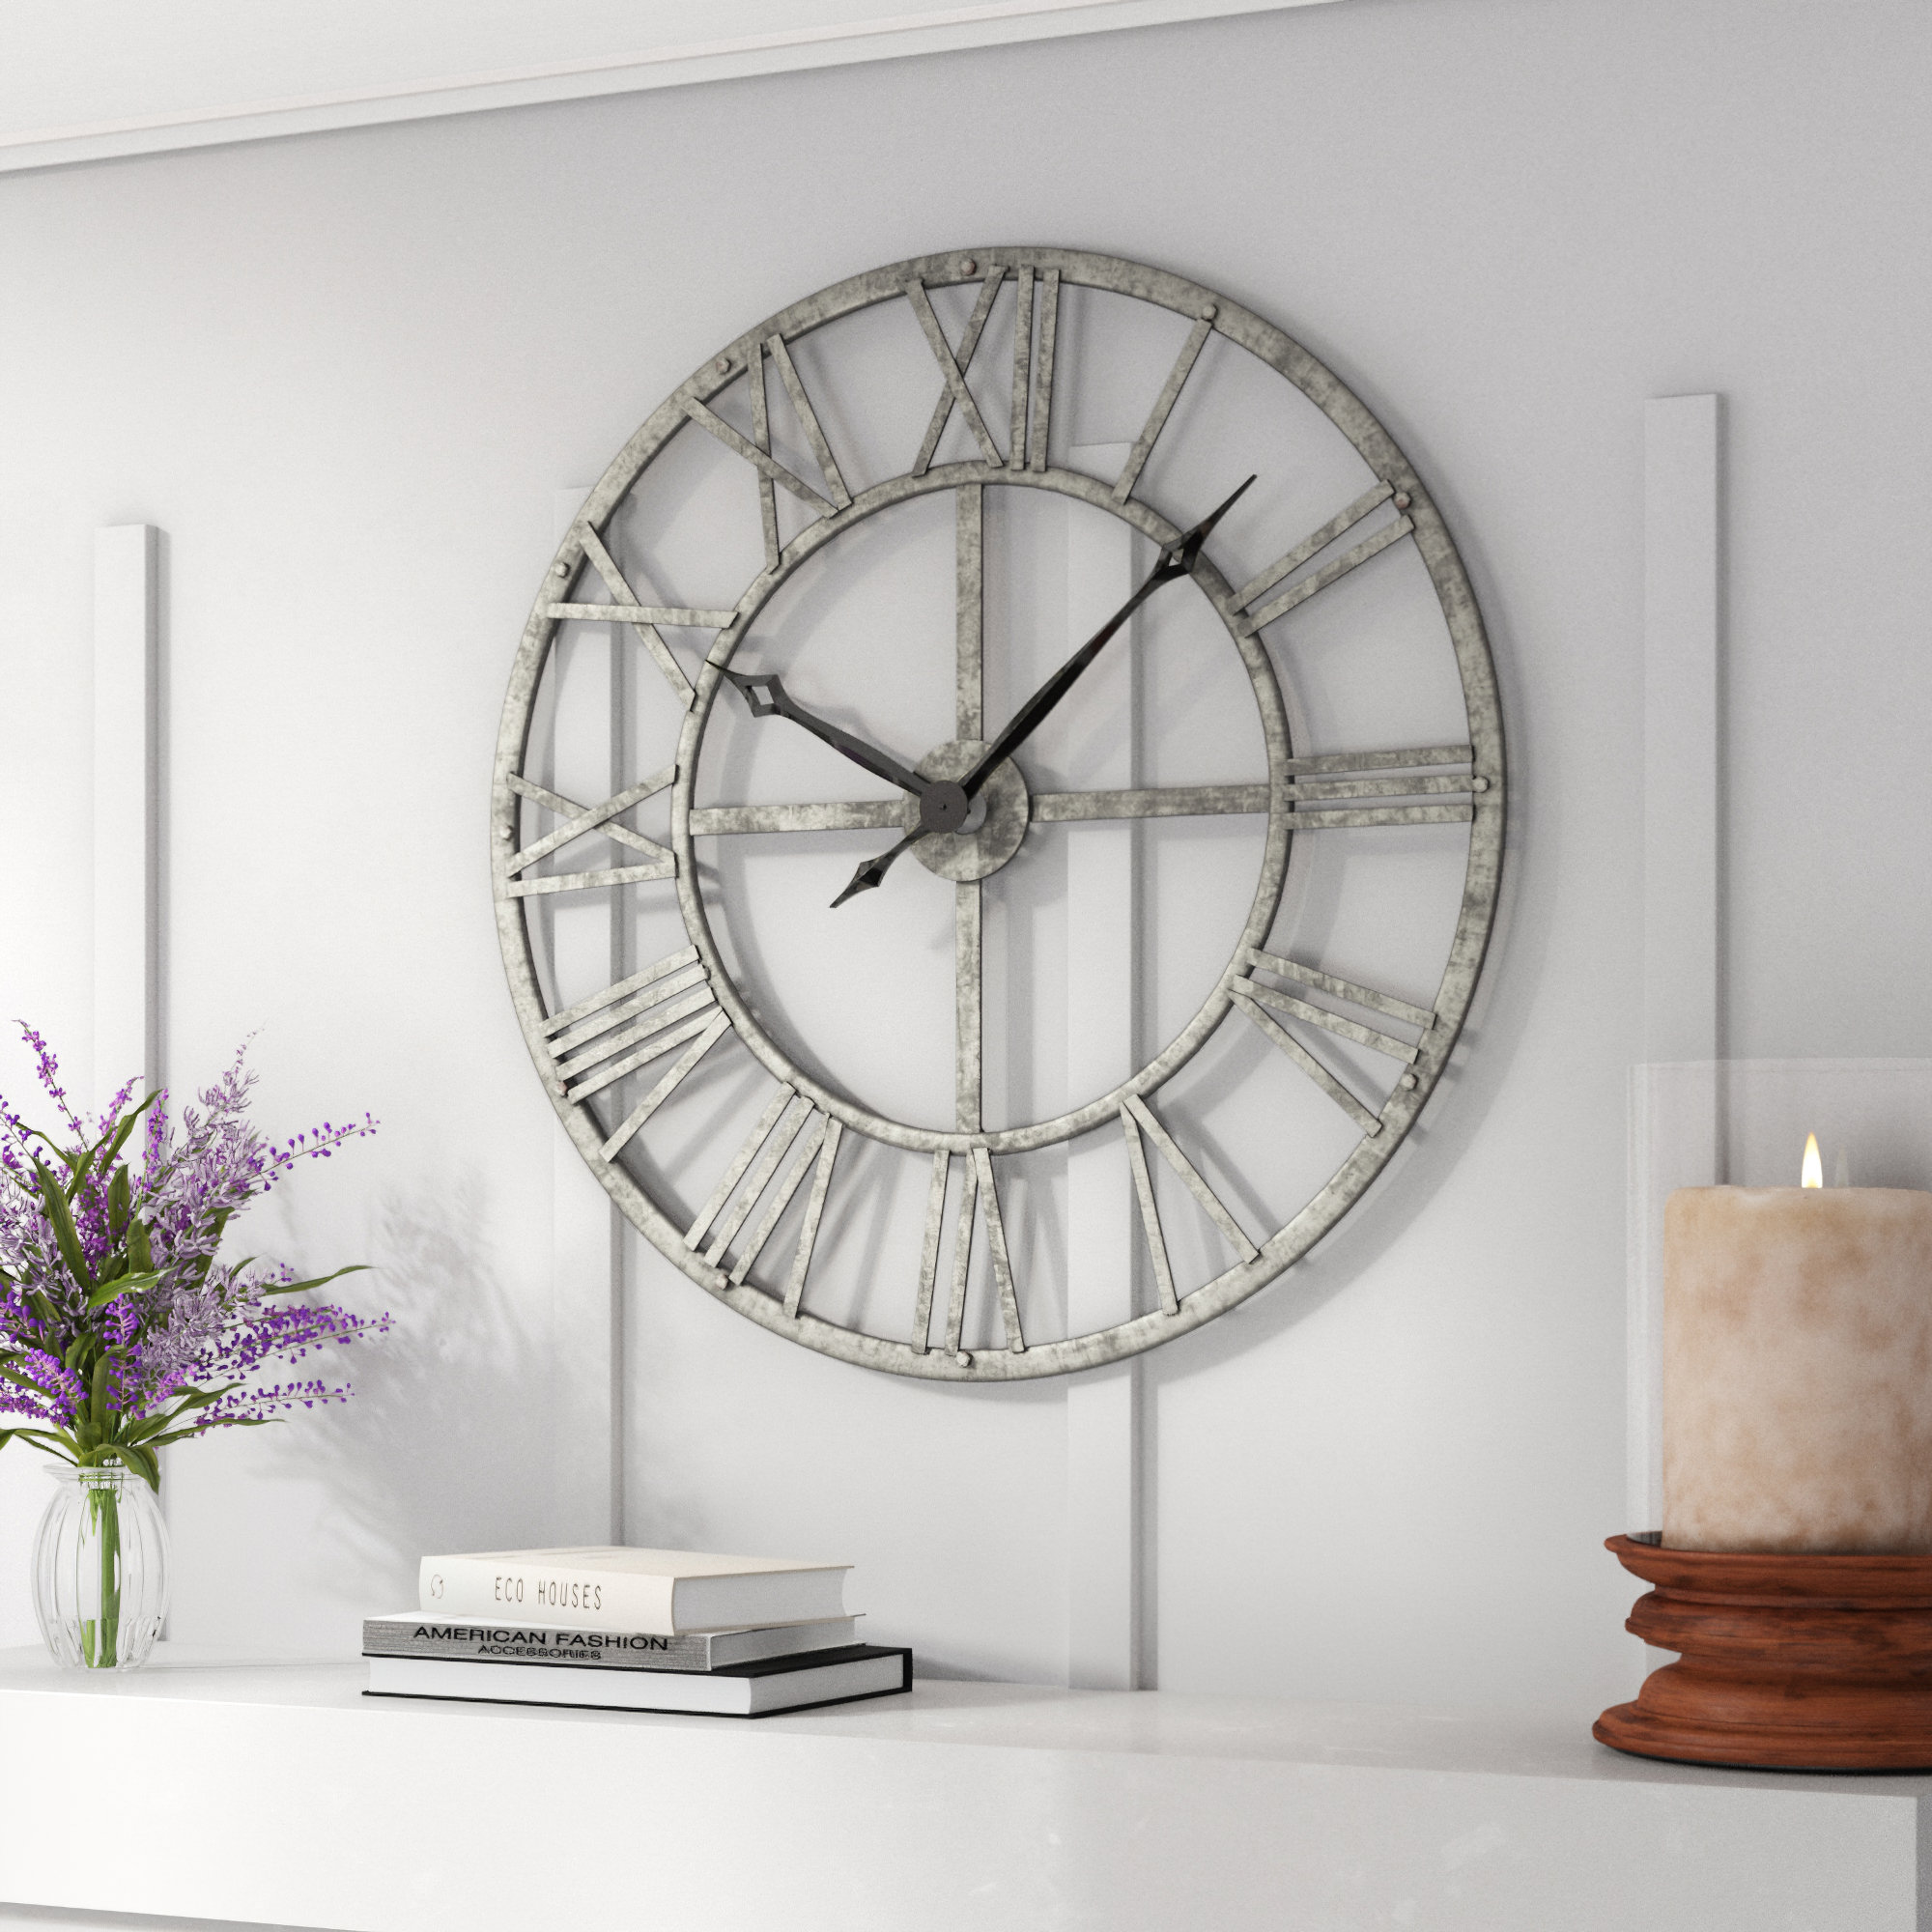 Bedroom Bathroom Office 10 Inch Analog Wall Clocks Battery Operated Non Ticking Adalene Modern Metal Wall Clock Silent Kitchen White Face Aluminum Wall Clocks Decorative Living Room Décor 